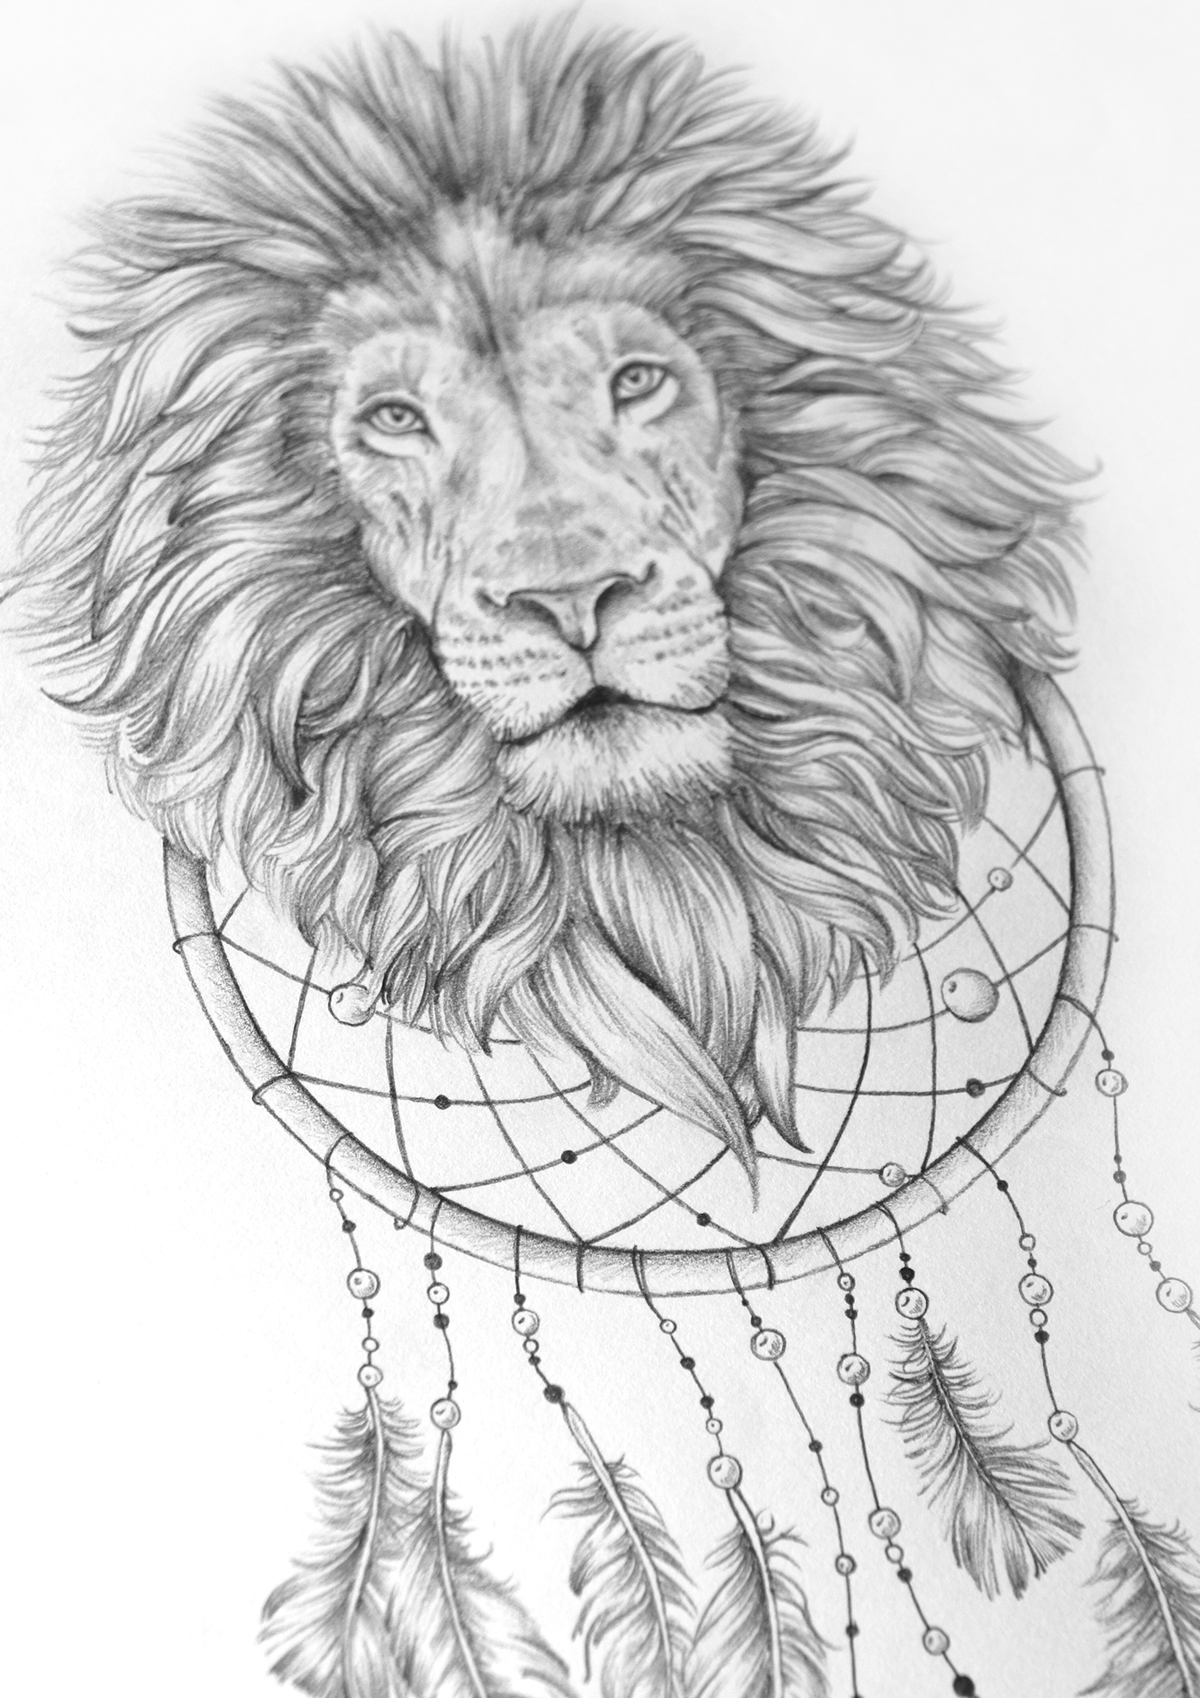 hand drawn beer bottle lion feathers boston Dream Catcher pencil sketch alcohol